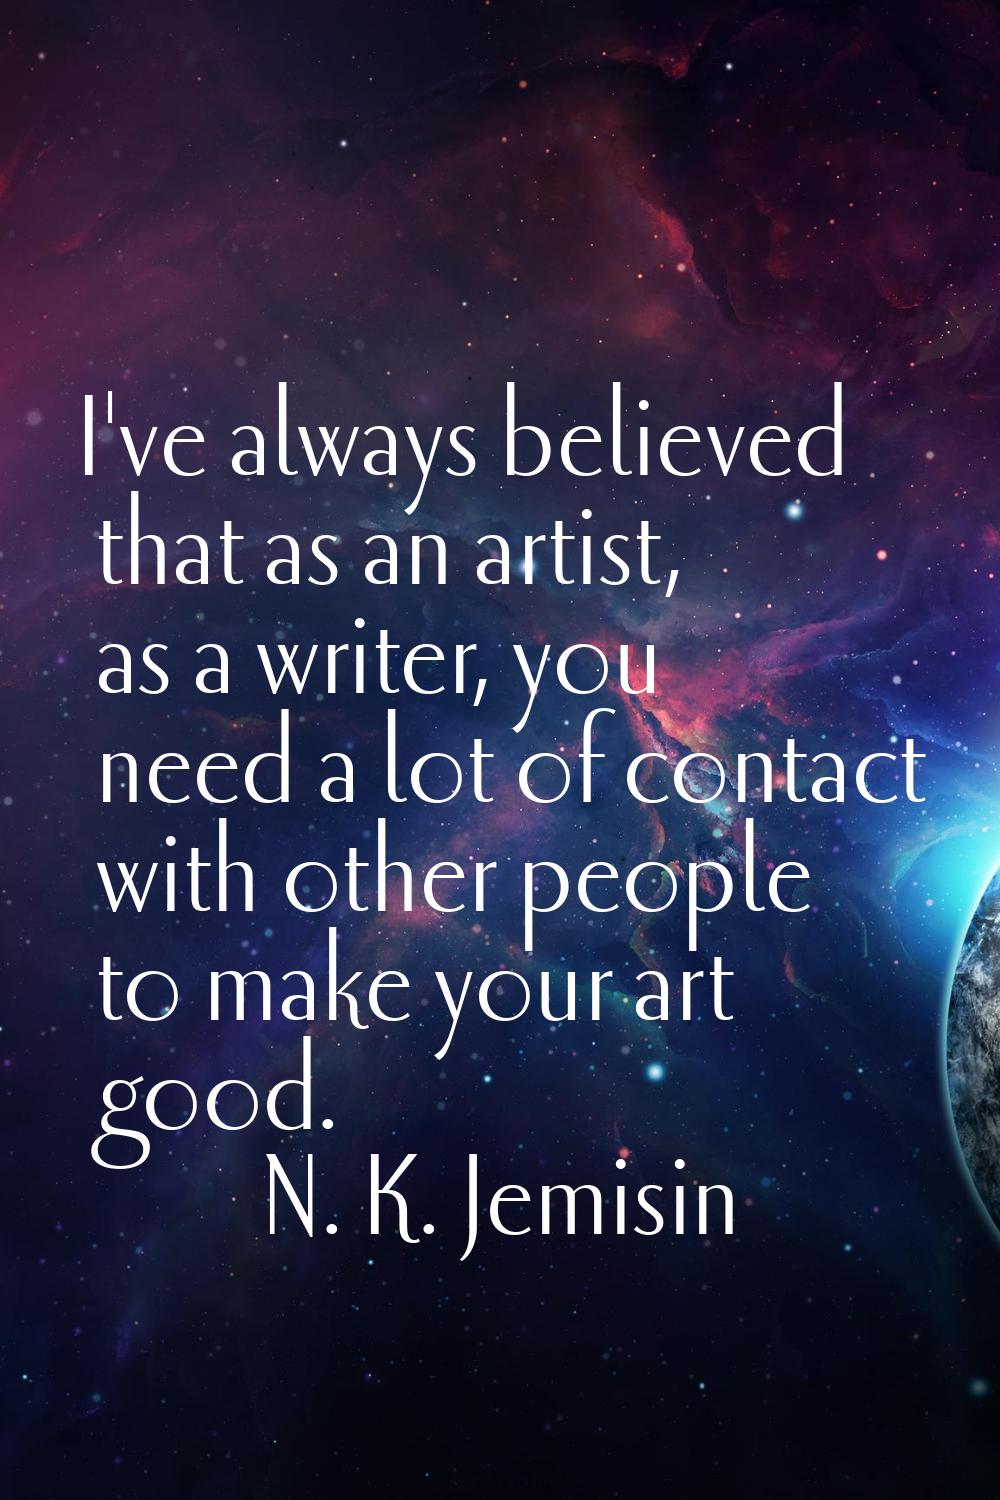 I've always believed that as an artist, as a writer, you need a lot of contact with other people to